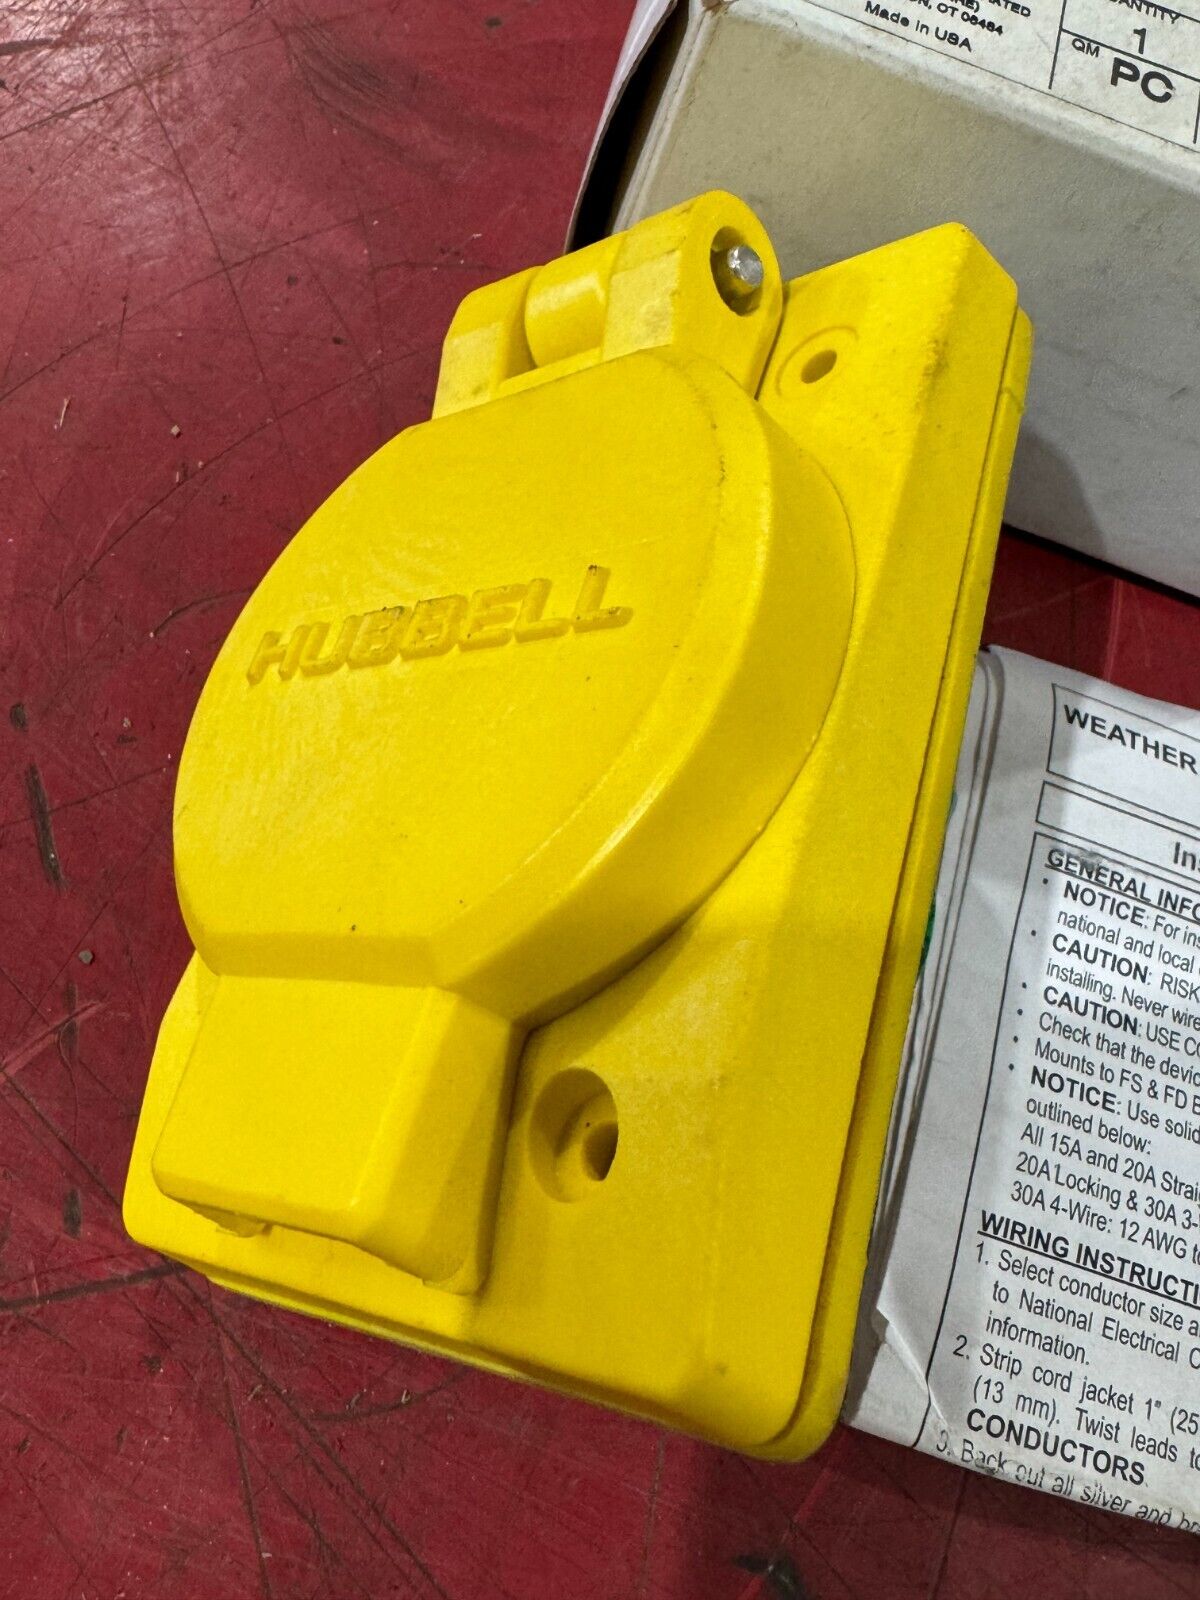 NEW IN BOX HUBBELL 15AMP 125V. WATERTIGHT RECEPTACLE 60W47H